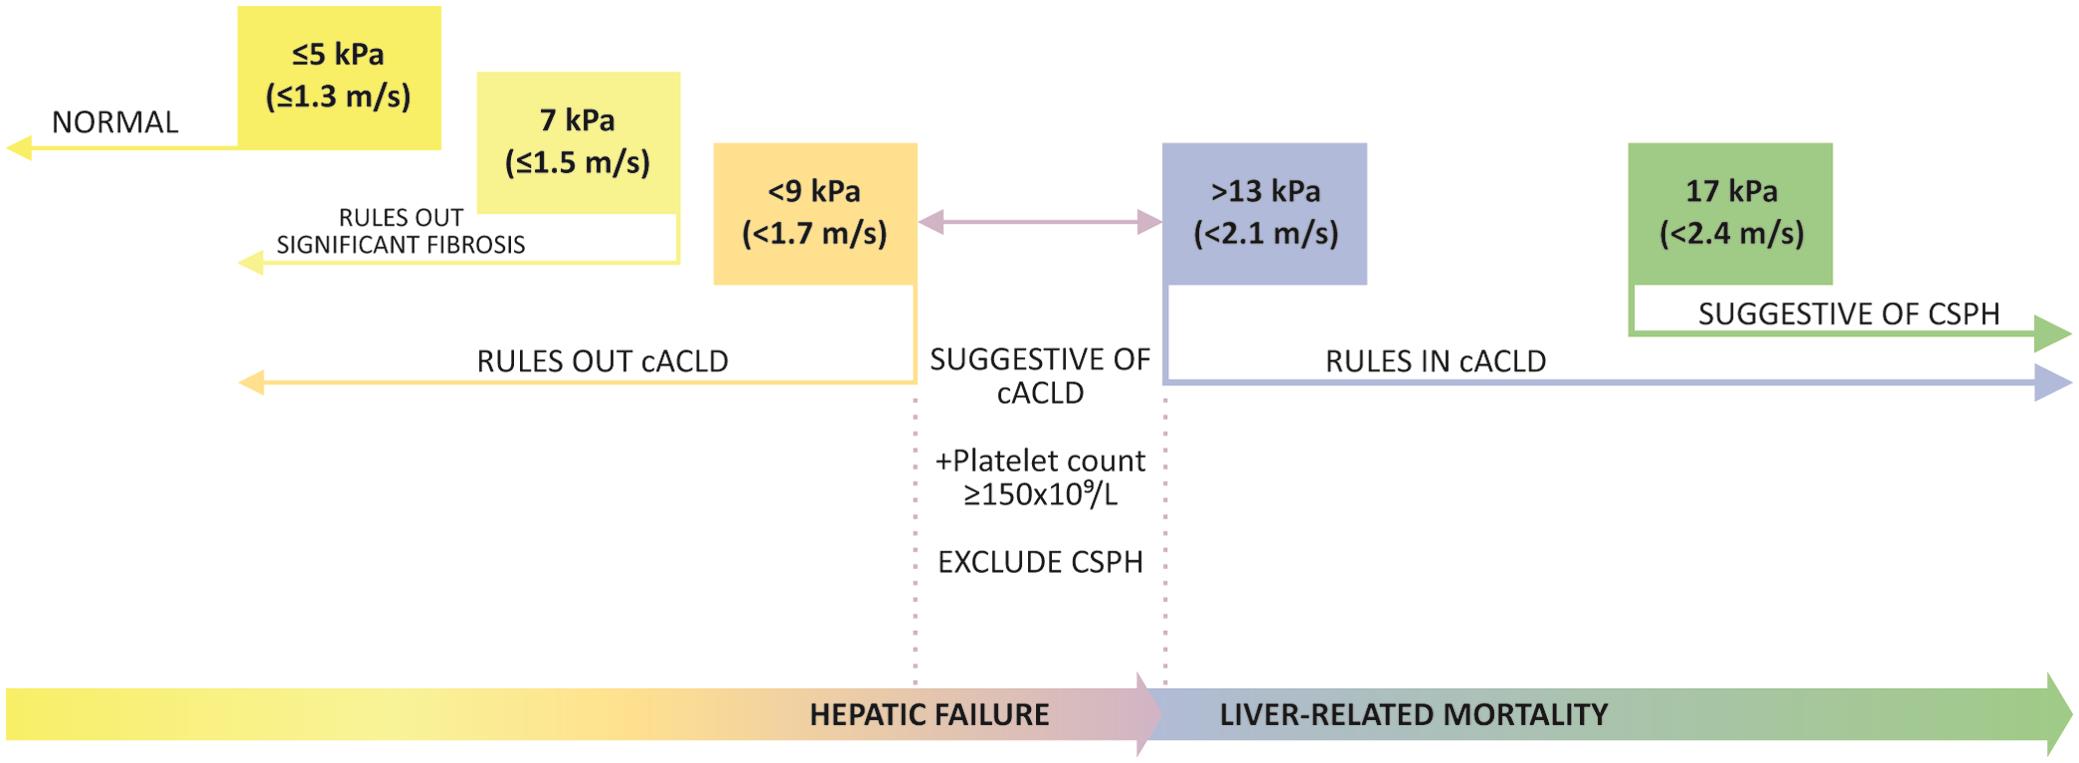 Schematic presentation of rule of four for LSM by SWE in viral hepatitis and NAFLD - recommendation adopted from Baveno VII consensus.